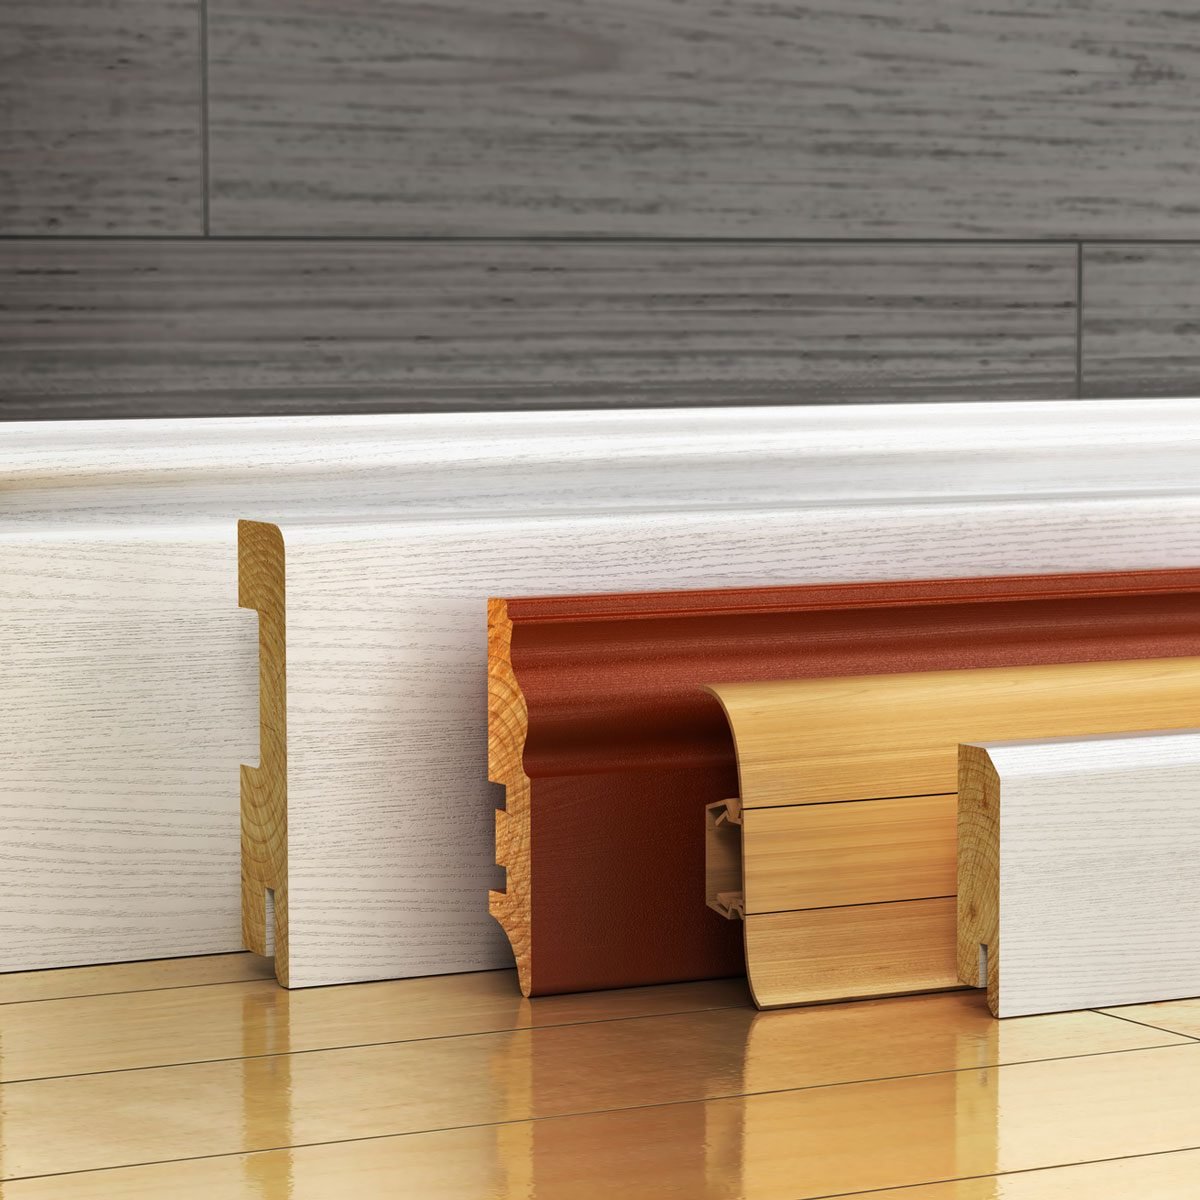 Types of baseboards